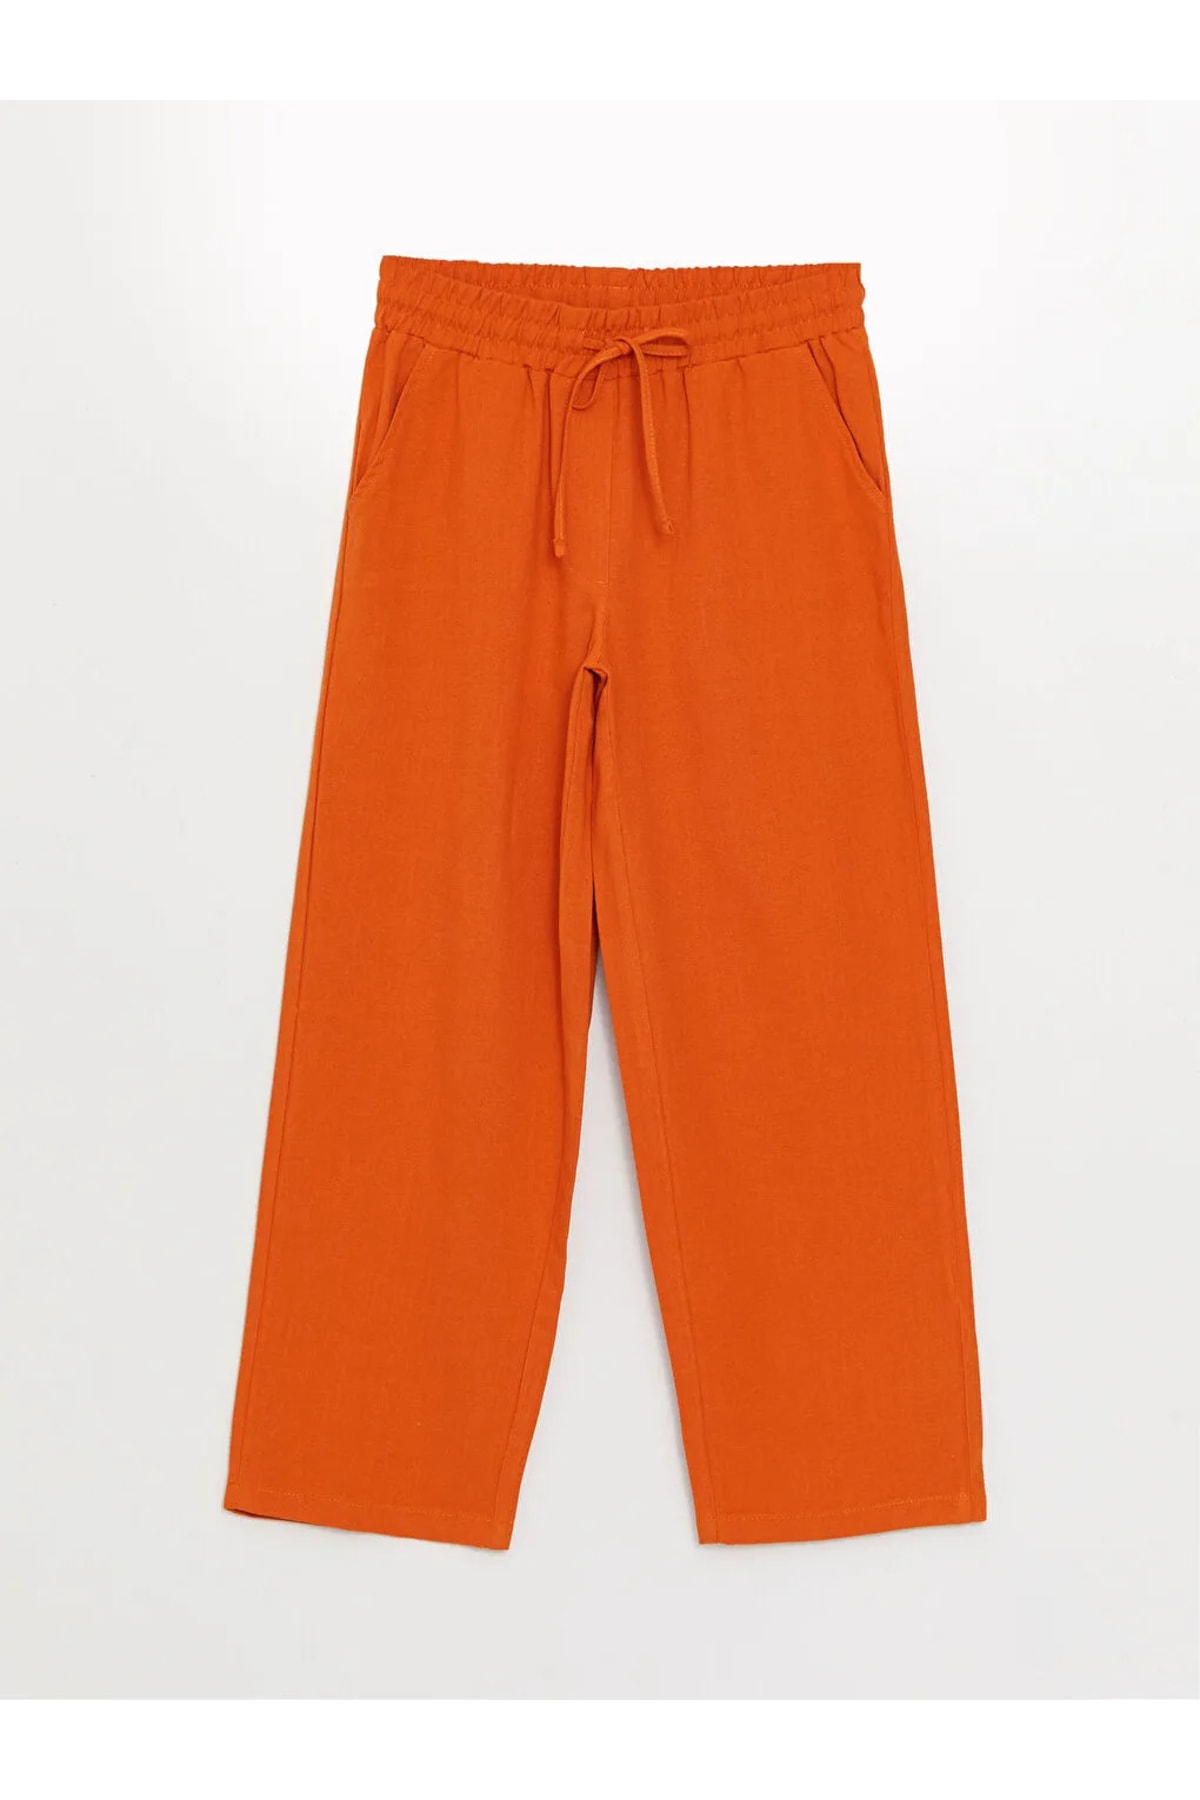 Levně LC Waikiki Lcw Modest Women's Elastic Waist, Comfortable Fit and Straight Linen Blended Trousers.